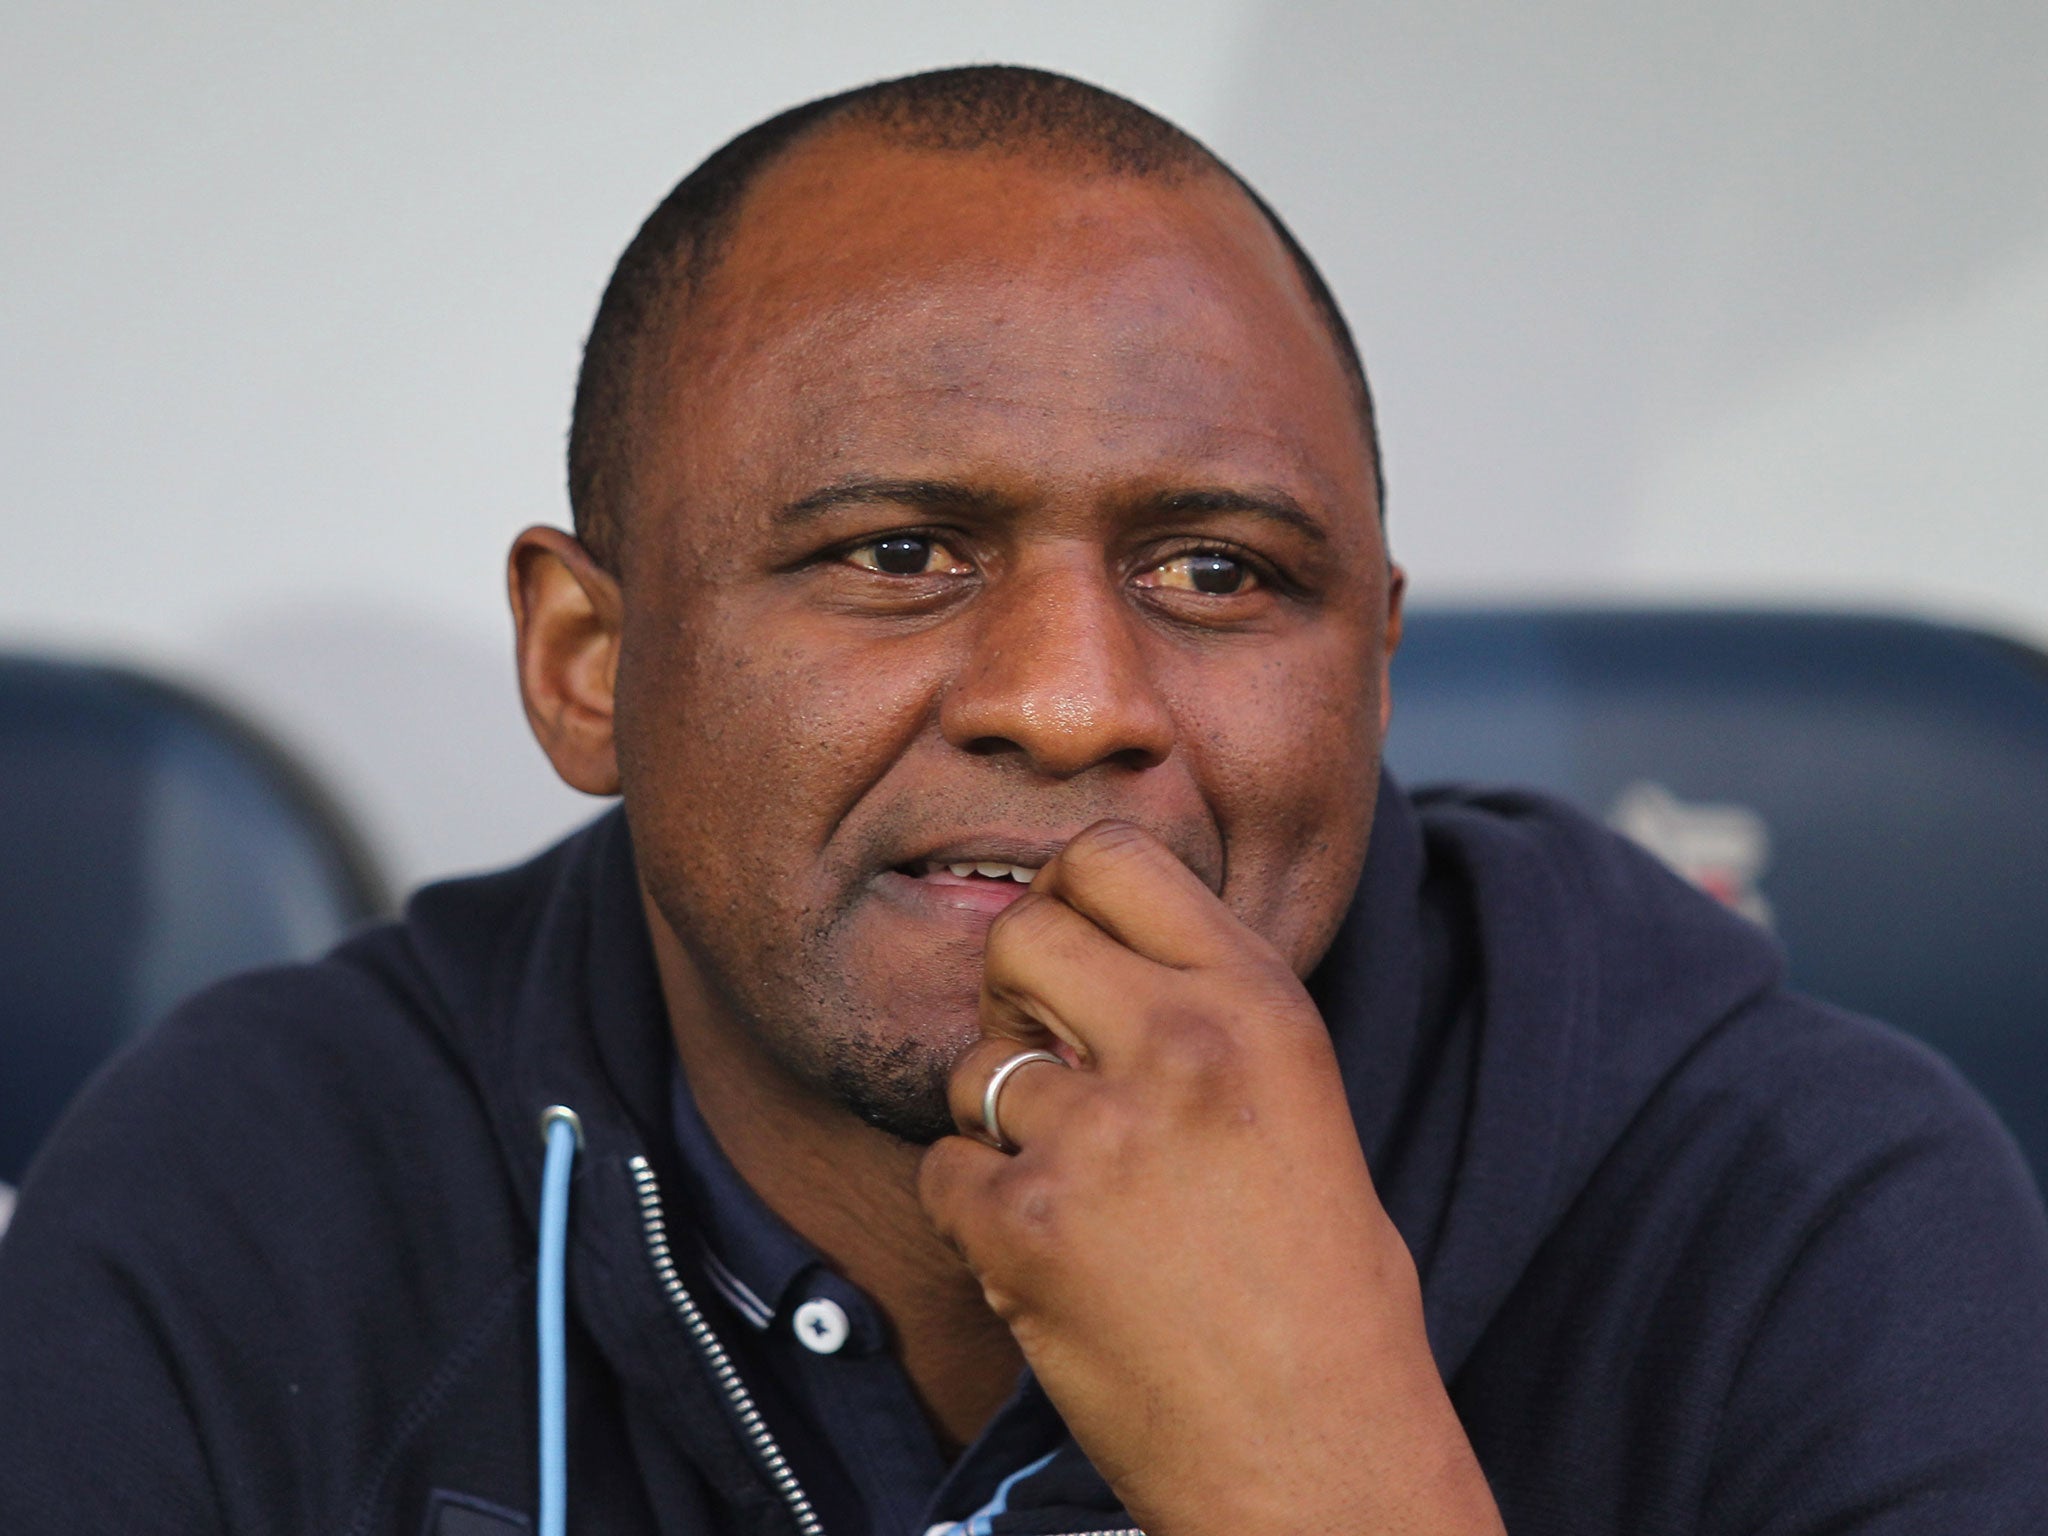 Vieira has learnt his trade as a manager though City's set up